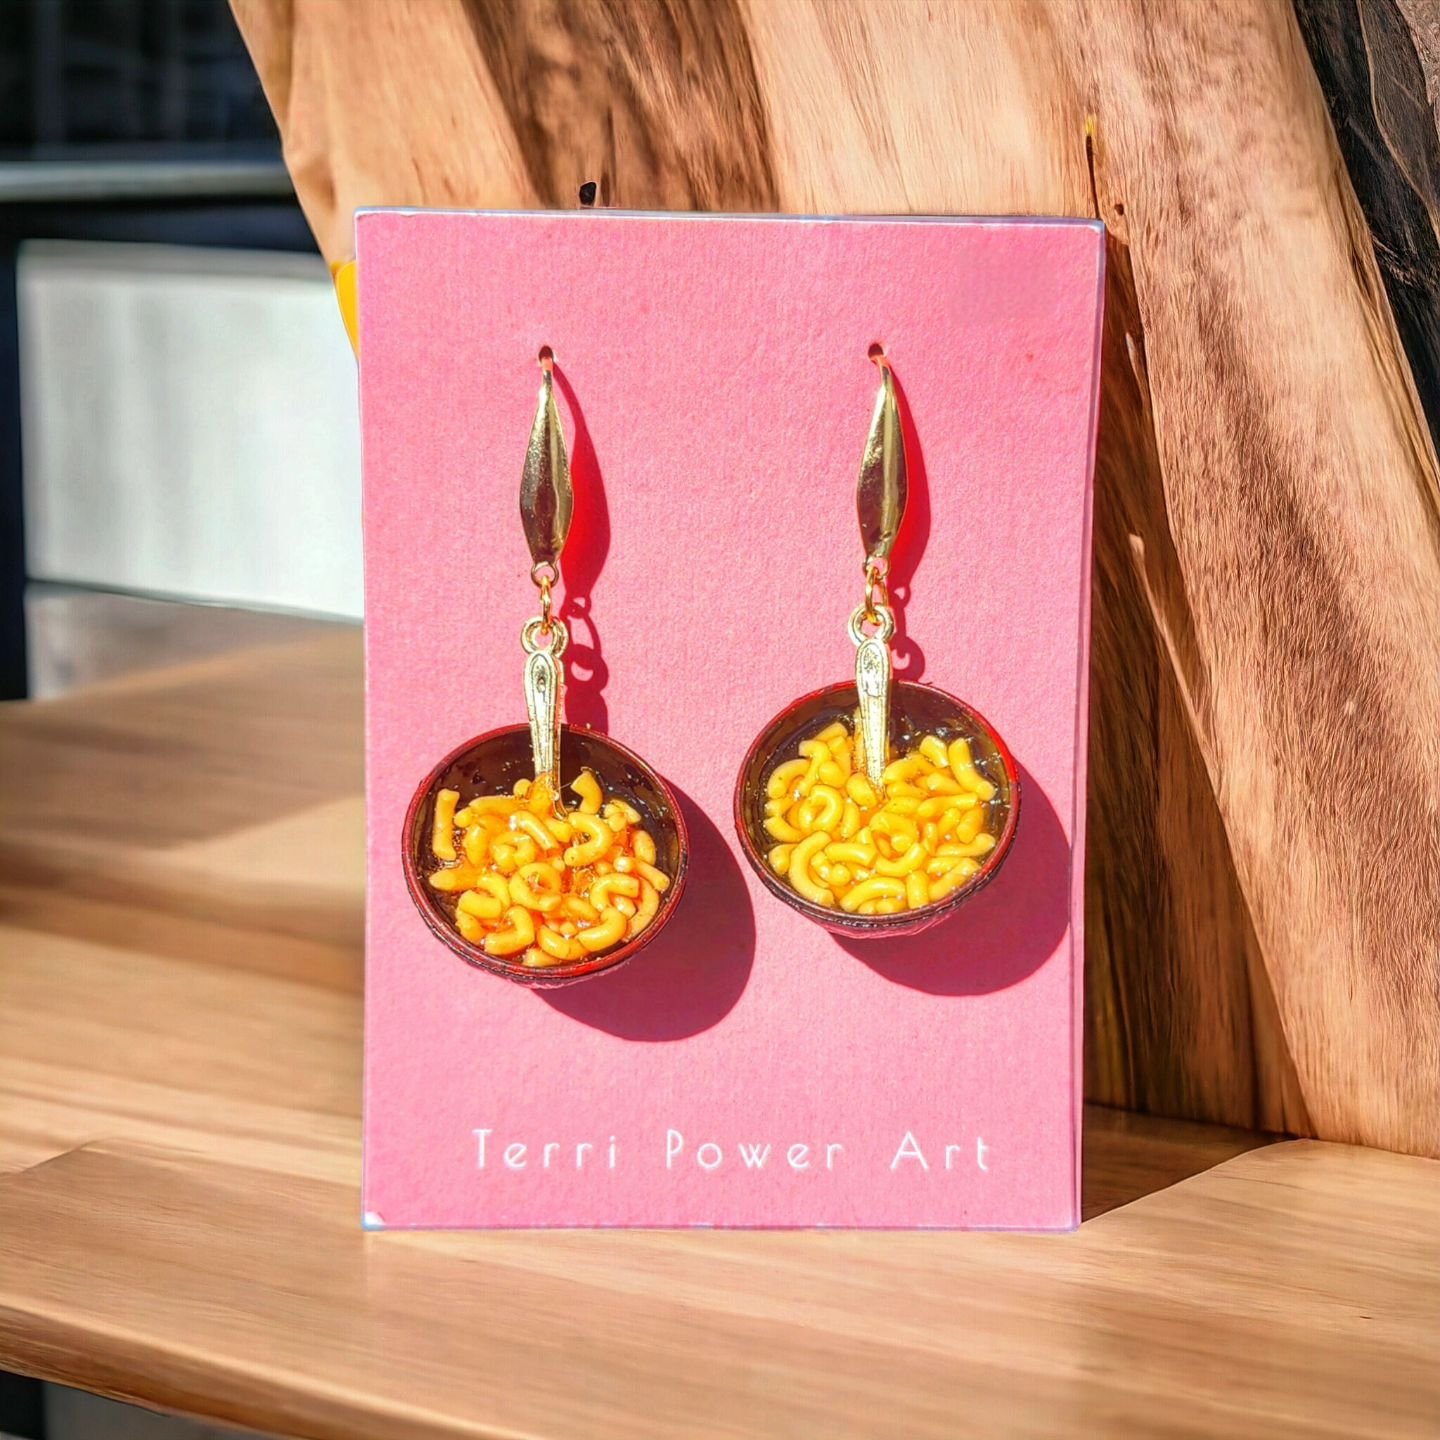 Loving the addition of the little spoons to these bowls of KD
.
 #terripowerart #handmade  #instaartist #wearableart #polymerclay #clayearrings  #downtowndartmouth #handmadejewelry #polymerclayjewelry #polymerclayearrings #handmadeearrings #earringsh